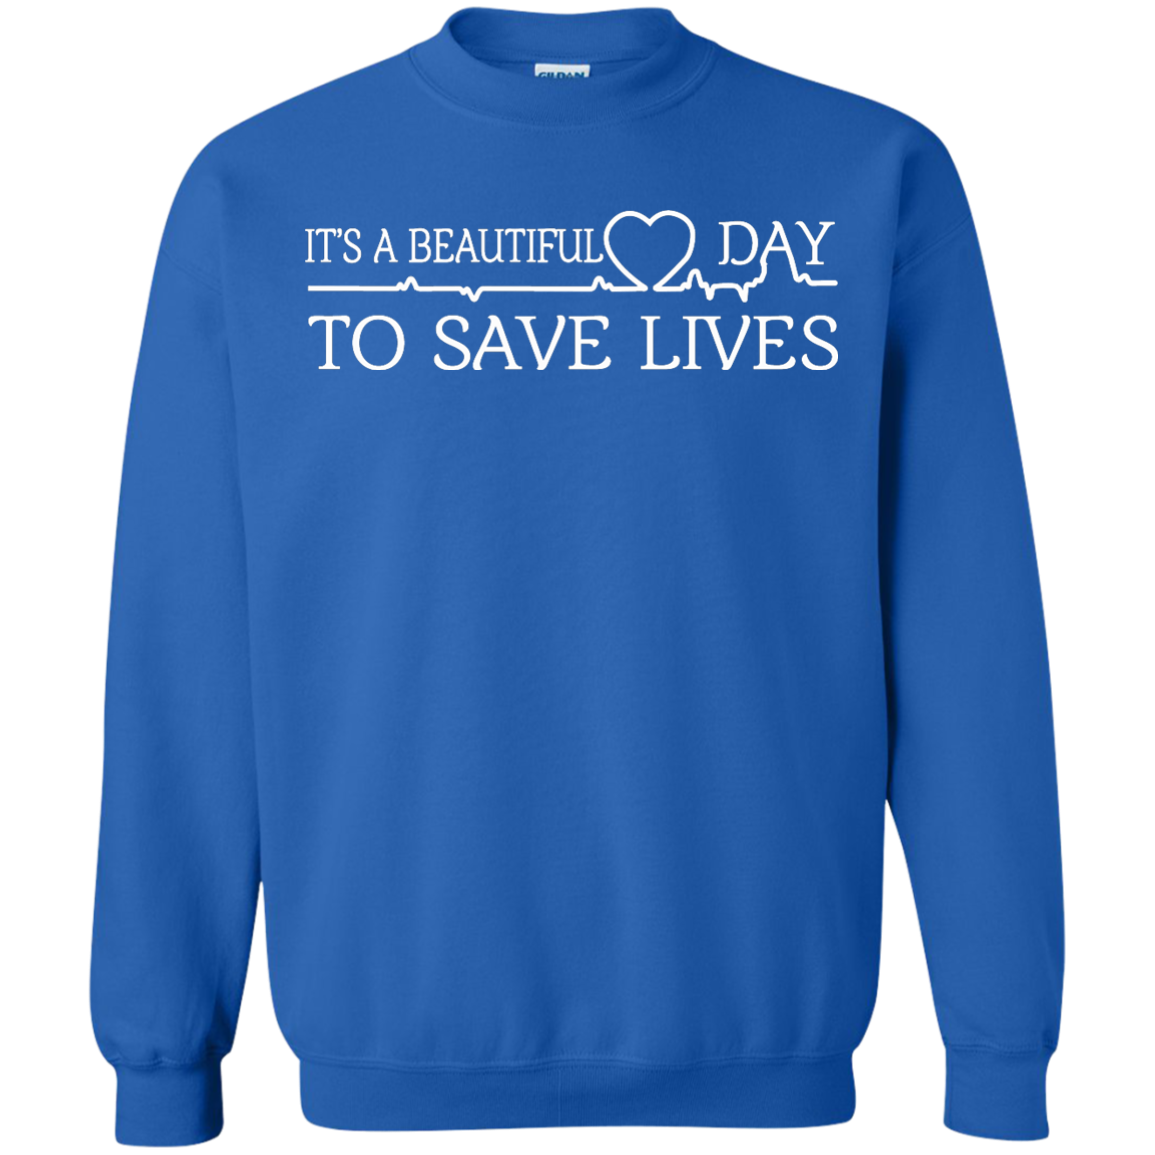 It's a Beautiful Day To Save Lives Sweater, Sweatshirt